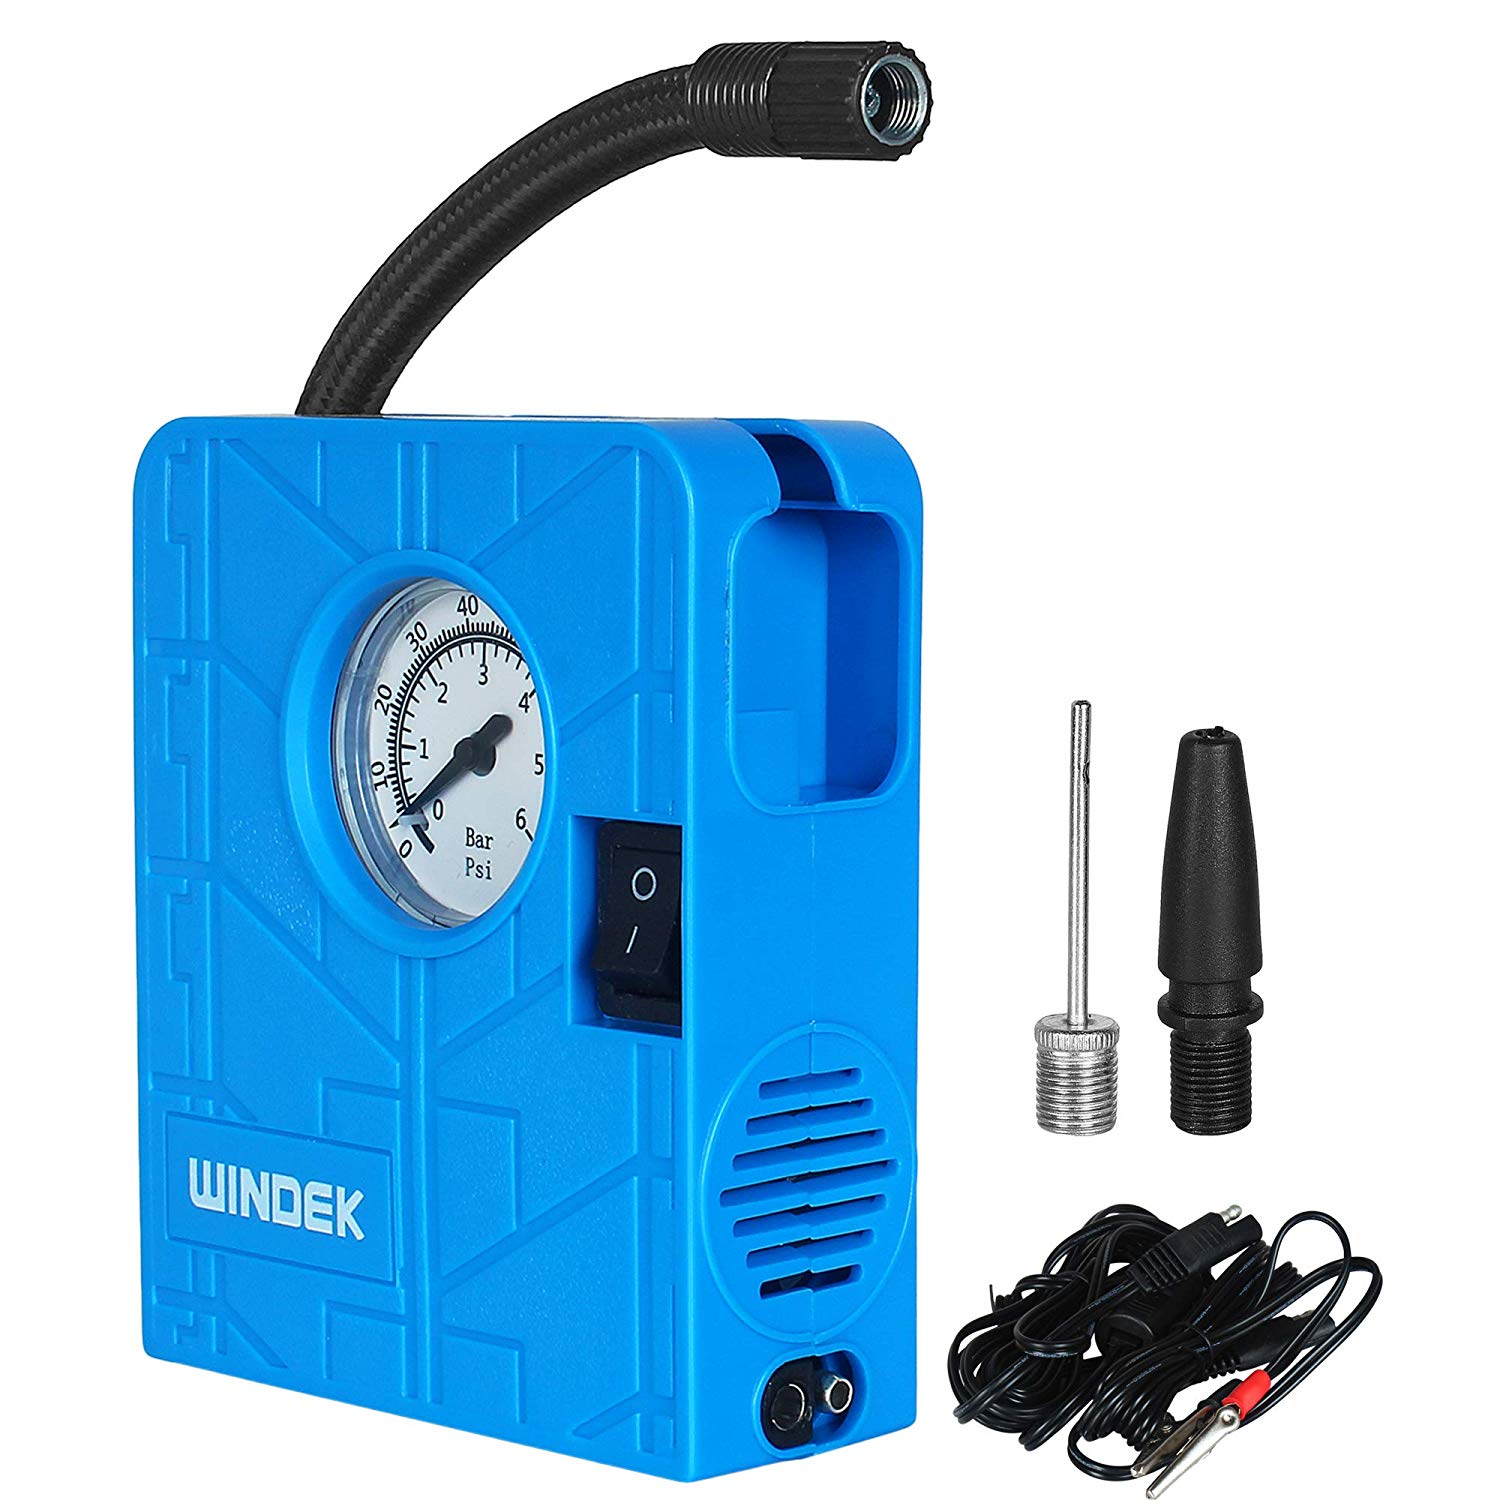 Windek 12V Portable Mini Air Pump Compressor Tire Inflator For Car,  Motorcycle, With LED Light